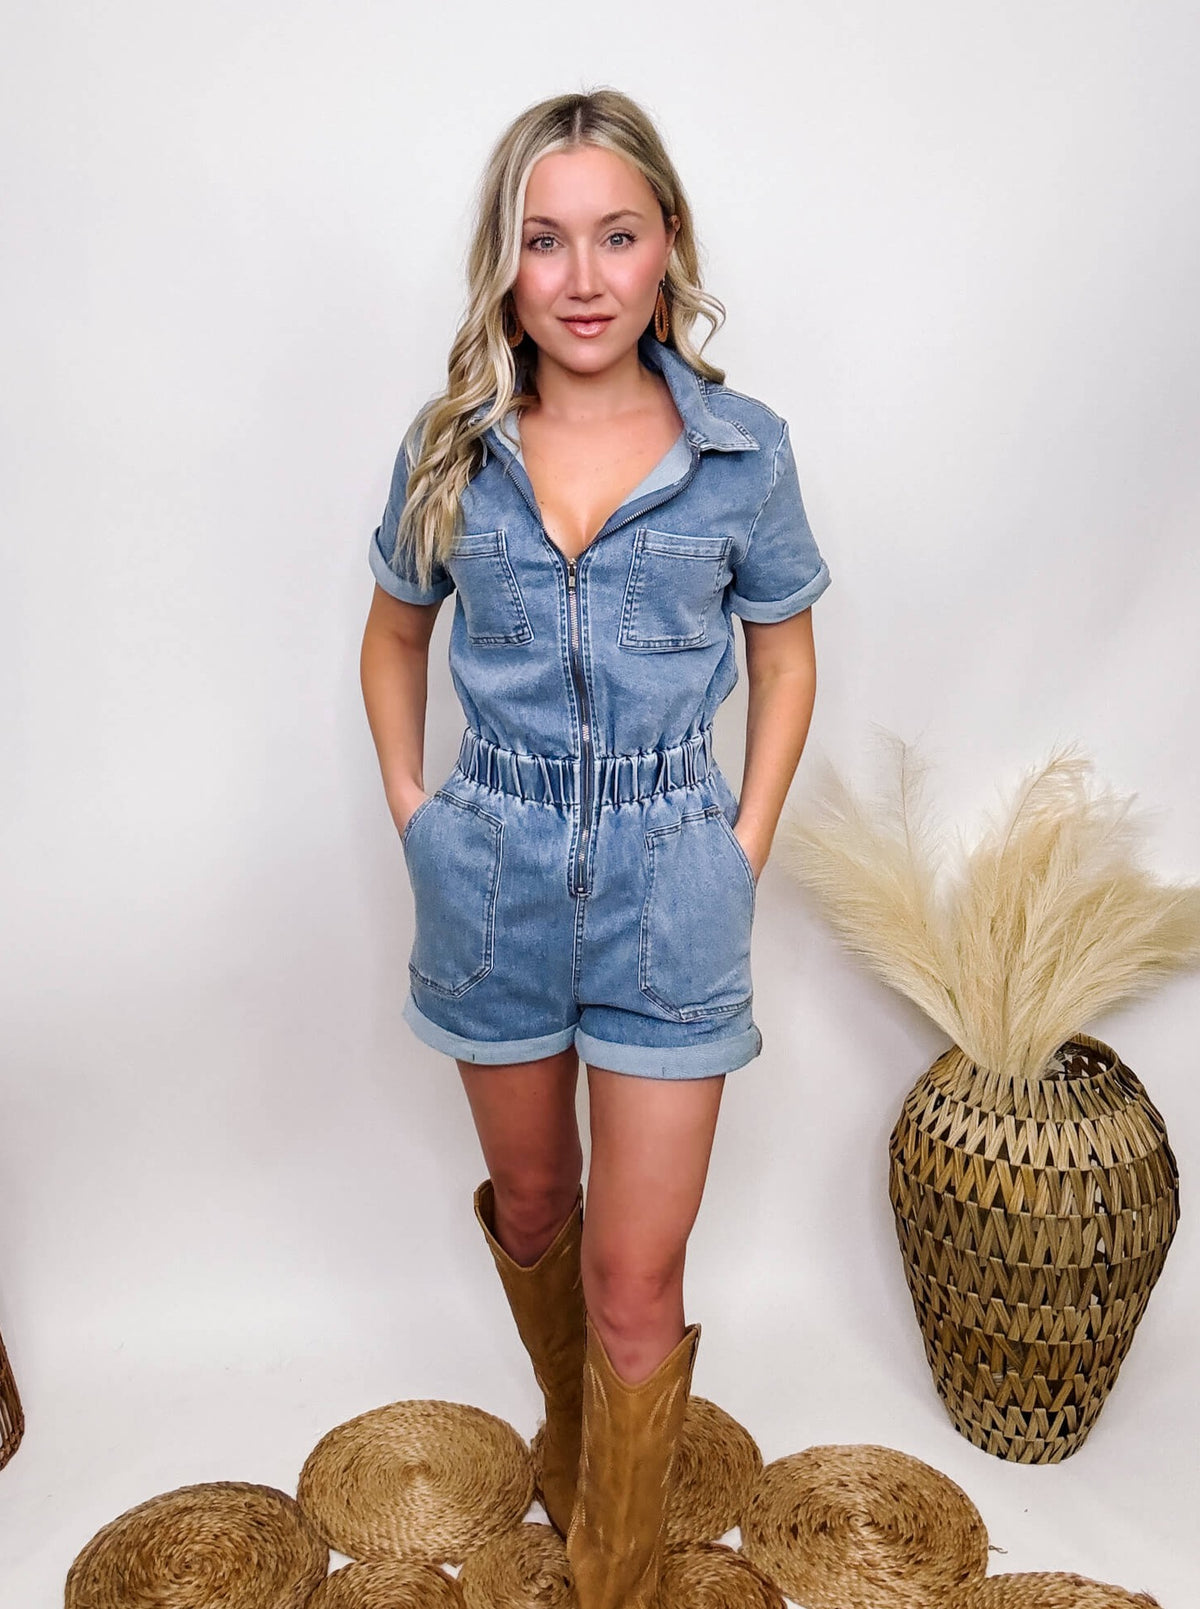 Blue B Blue Stretchy Denim Utility Romper with Zip-Up Front, Stretchy Elastic Cinched Waist, Double Side Pockets, Back Pockets, Chest Pockets. Fitted with Stretch, True to Size. Made of 97% Cotton, 3% Spandex.